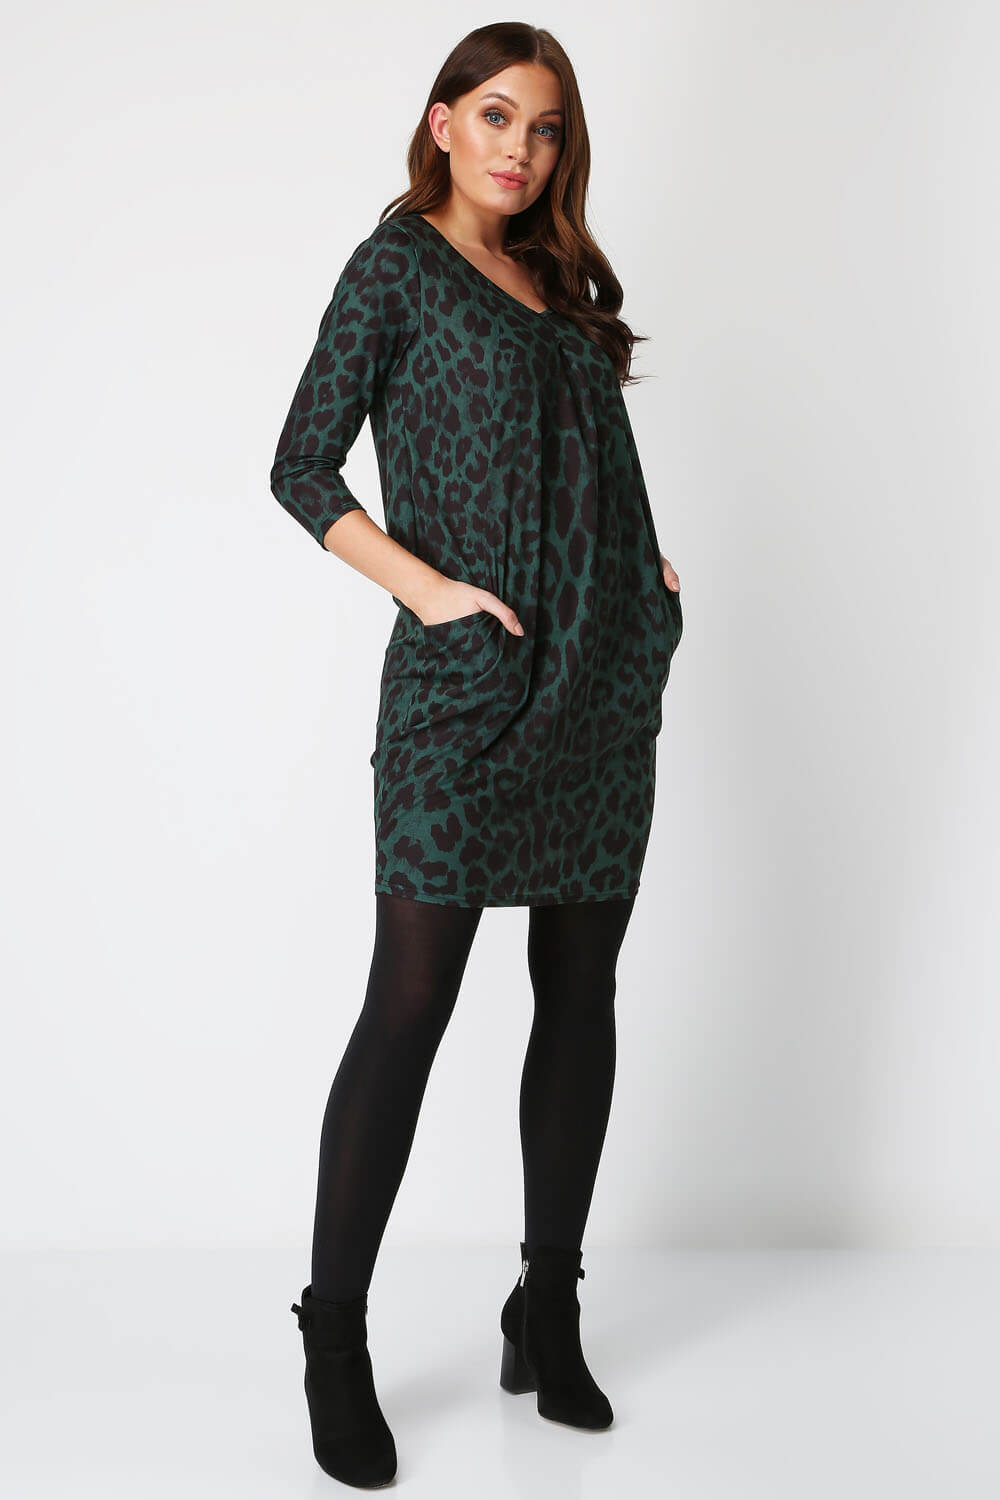 Green Animal Leopard Print Slouch Dress, Image 2 of 5